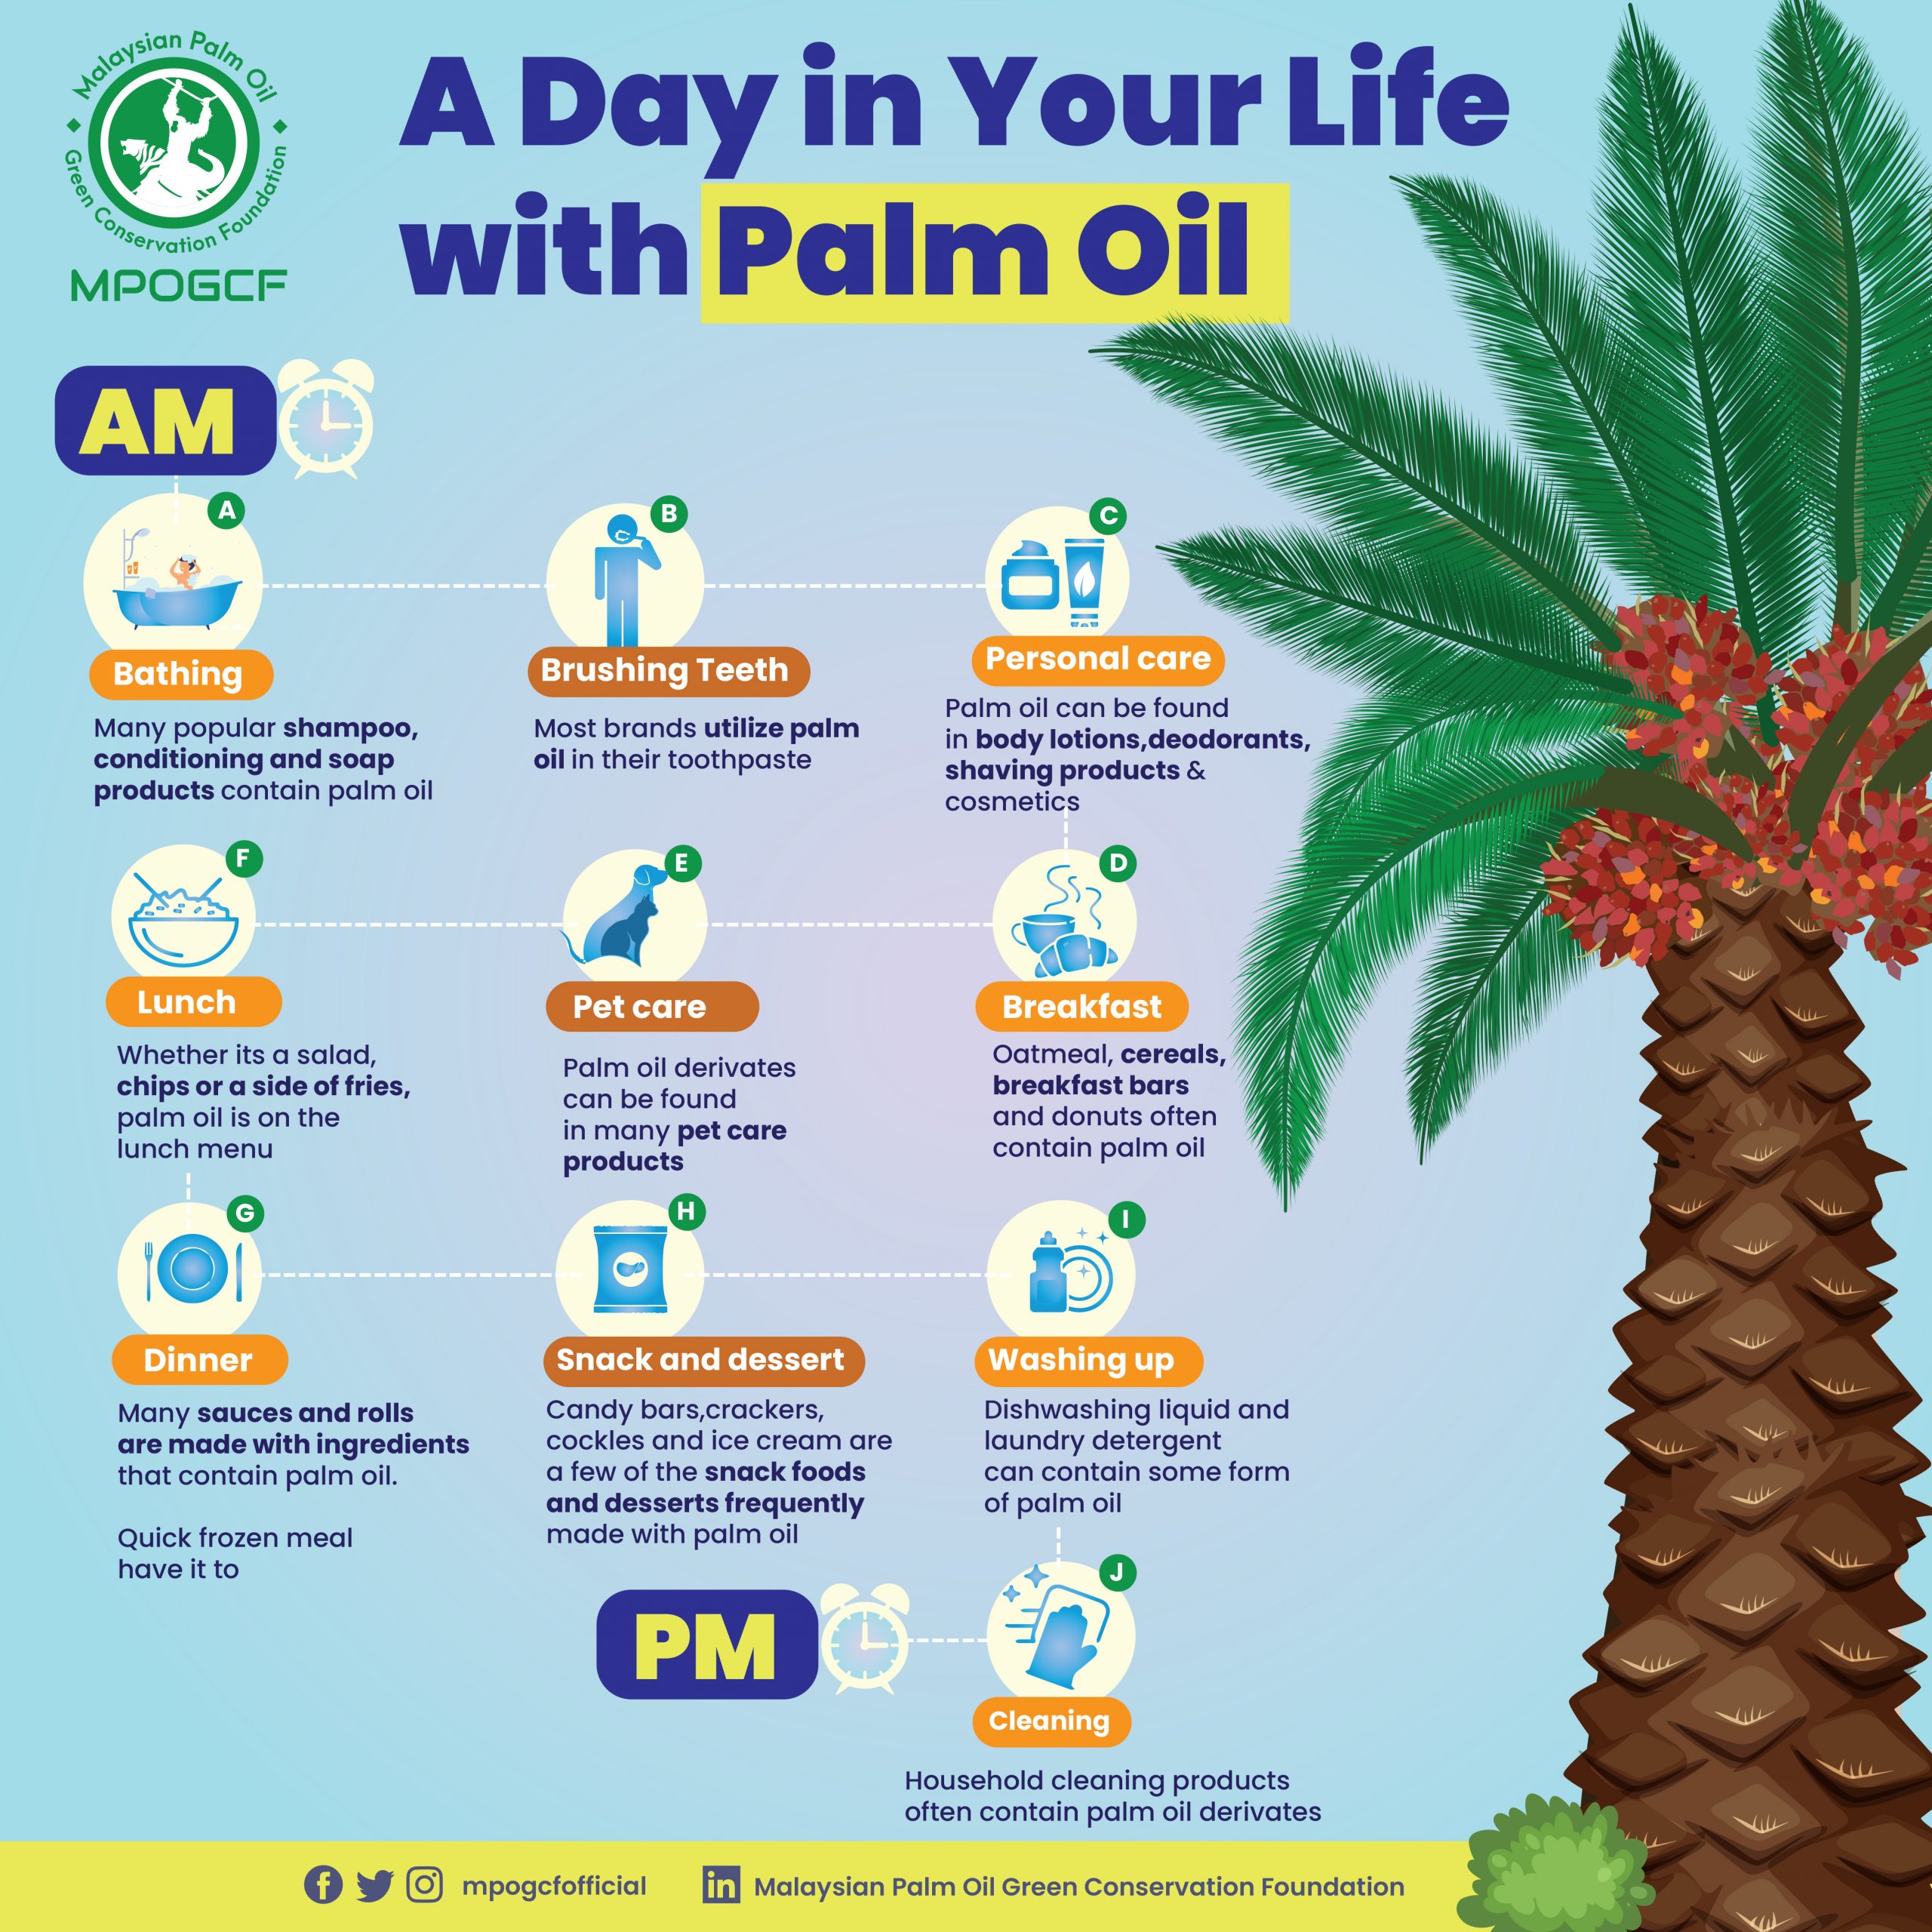 A Day in Your Life with Palm Oil